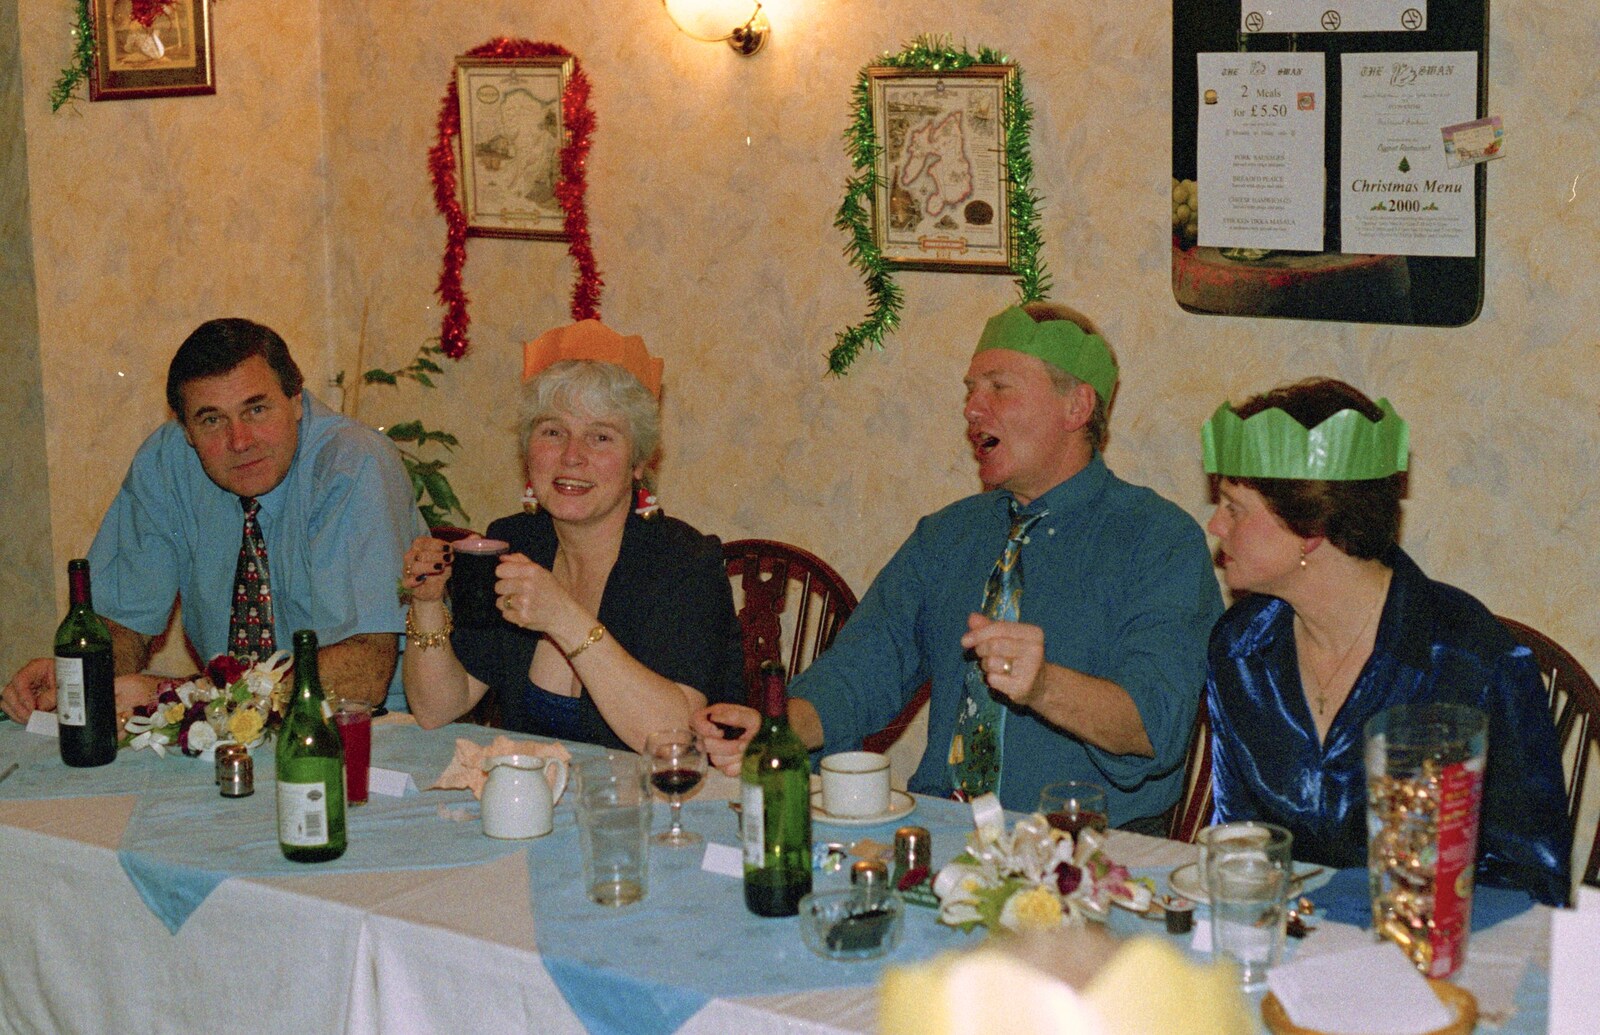 Alan, Spam and a singing John Willy from The BSCC Christmas Dinner, The Swan Inn, Brome, Suffolk - 8th December 2000